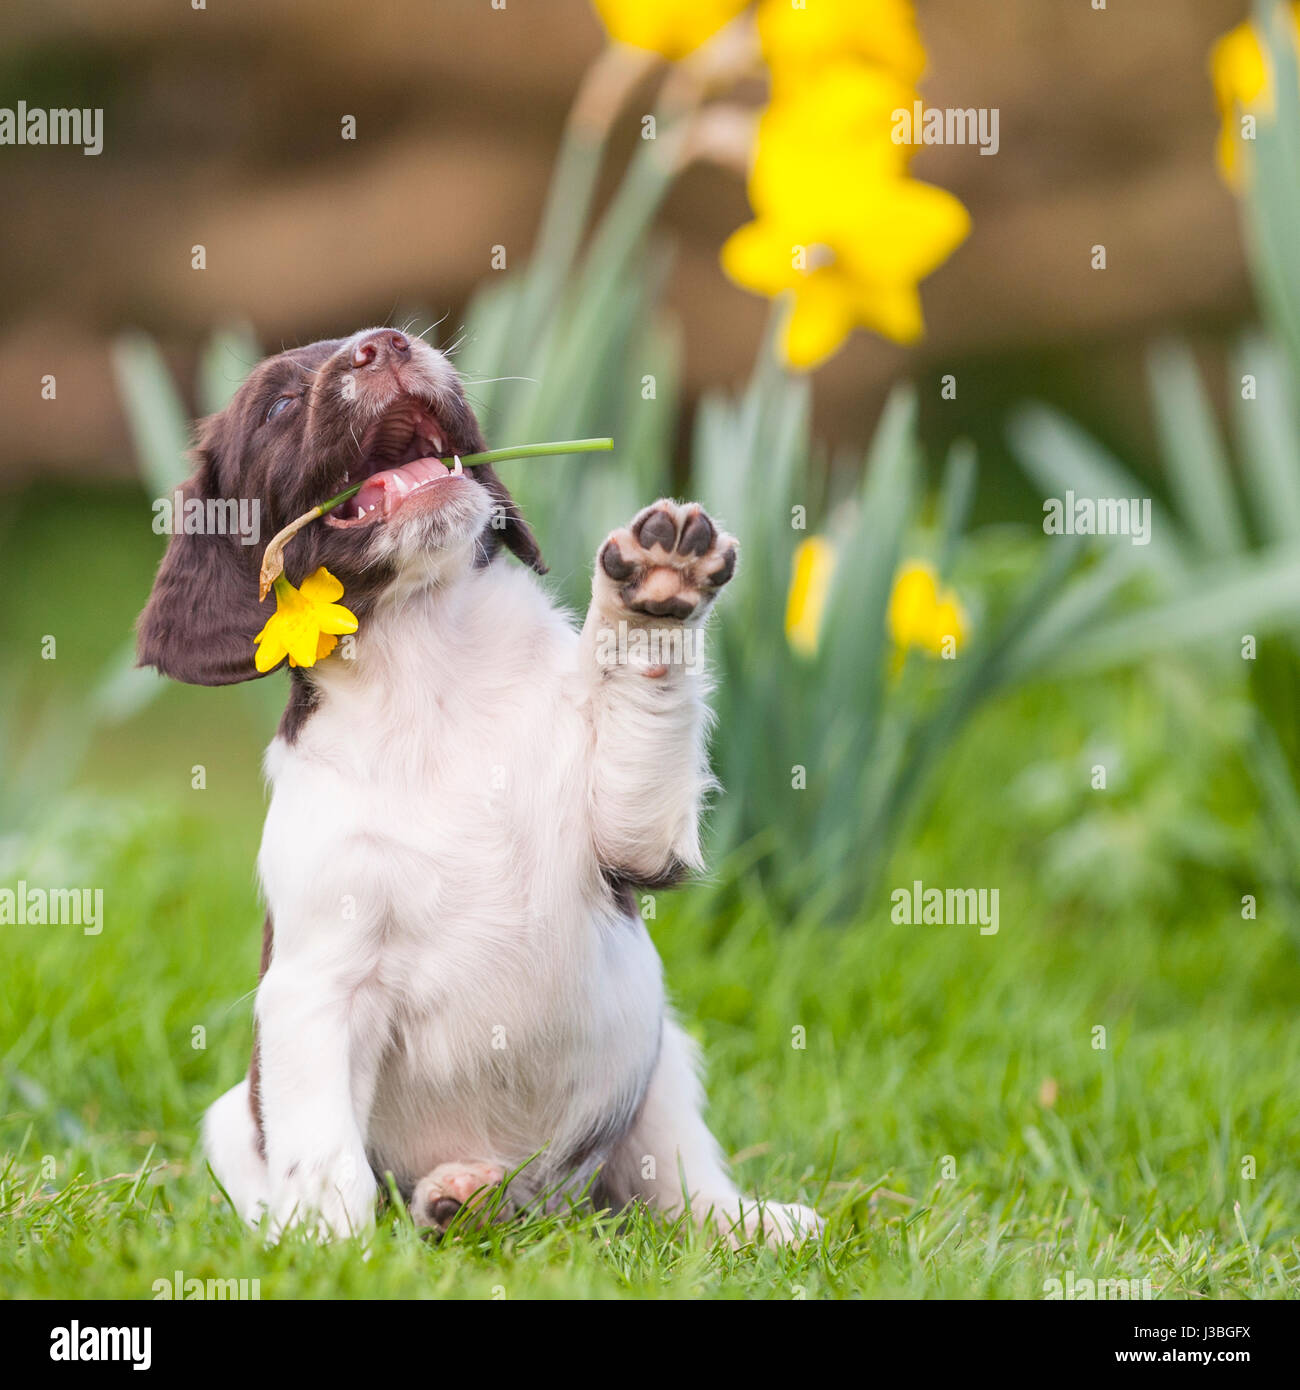 A 6 week old English Springer Spaniel puppy in the Uk Stock Photo